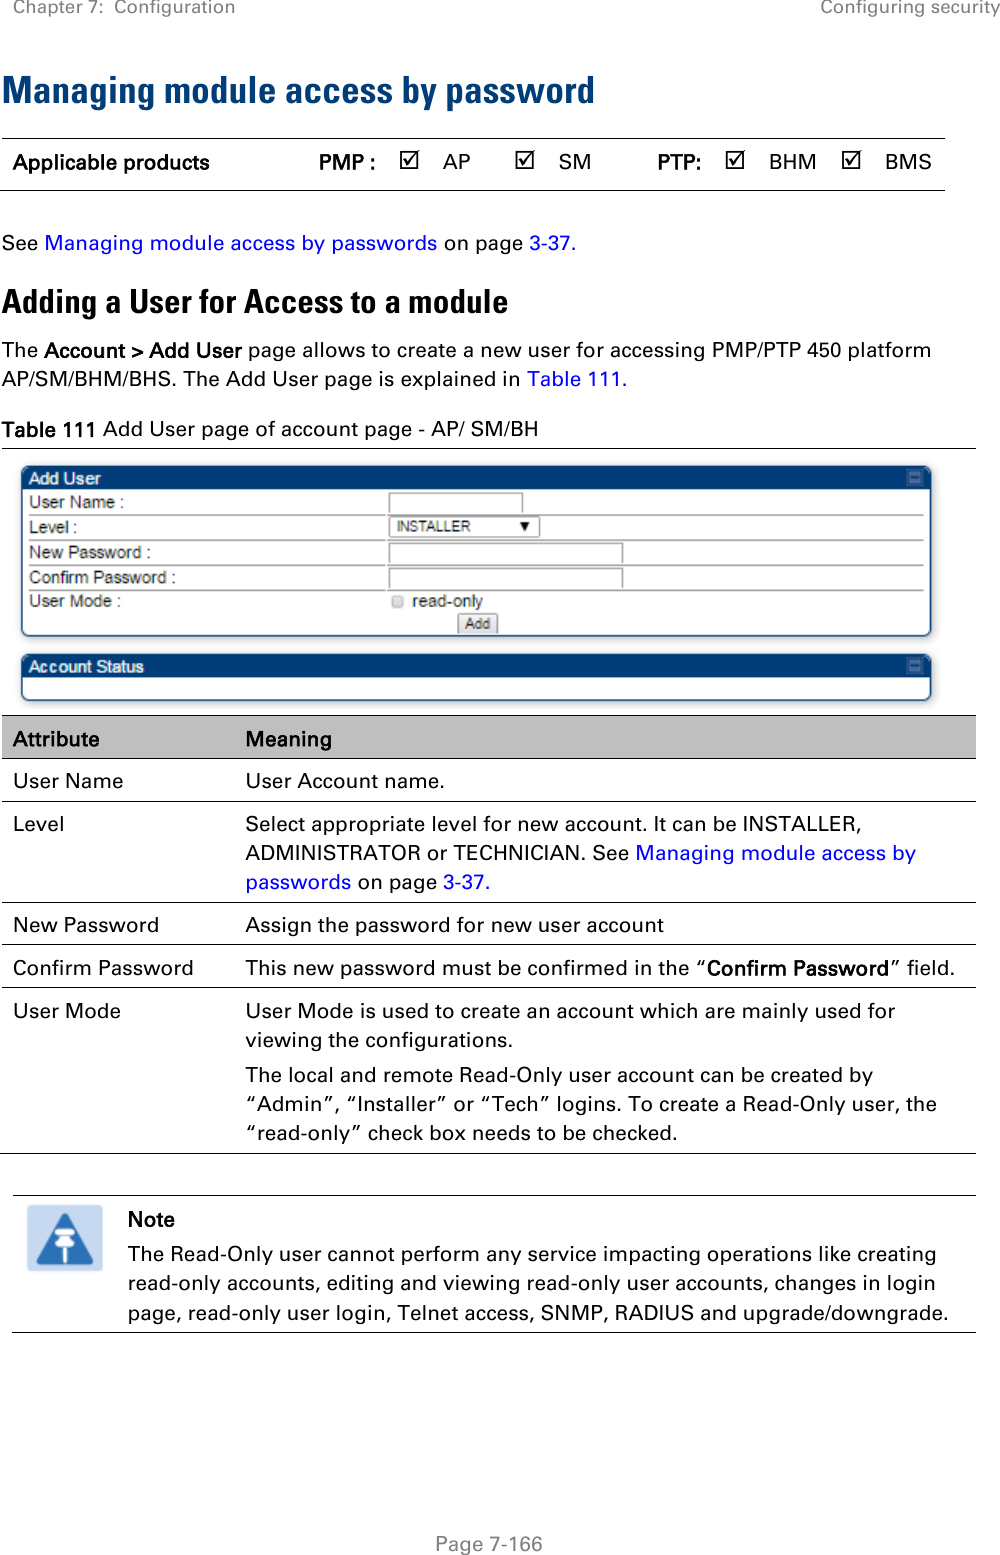 Chapter 7:  Configuration Configuring security   Page 7-166 Managing module access by password Applicable products PMP :  AP  SM PTP:  BHM  BMS  See Managing module access by passwords on page 3-37. Adding a User for Access to a module The Account &gt; Add User page allows to create a new user for accessing PMP/PTP 450 platform AP/SM/BHM/BHS. The Add User page is explained in Table 111. Table 111 Add User page of account page - AP/ SM/BH  Attribute Meaning User Name User Account name. Level Select appropriate level for new account. It can be INSTALLER, ADMINISTRATOR or TECHNICIAN. See Managing module access by passwords on page 3-37. New Password Assign the password for new user account Confirm Password This new password must be confirmed in the “Confirm Password” field. User Mode User Mode is used to create an account which are mainly used for viewing the configurations.  The local and remote Read-Only user account can be created by “Admin”, “Installer” or “Tech” logins. To create a Read-Only user, the “read-only” check box needs to be checked.   Note The Read-Only user cannot perform any service impacting operations like creating read-only accounts, editing and viewing read-only user accounts, changes in login page, read-only user login, Telnet access, SNMP, RADIUS and upgrade/downgrade.  